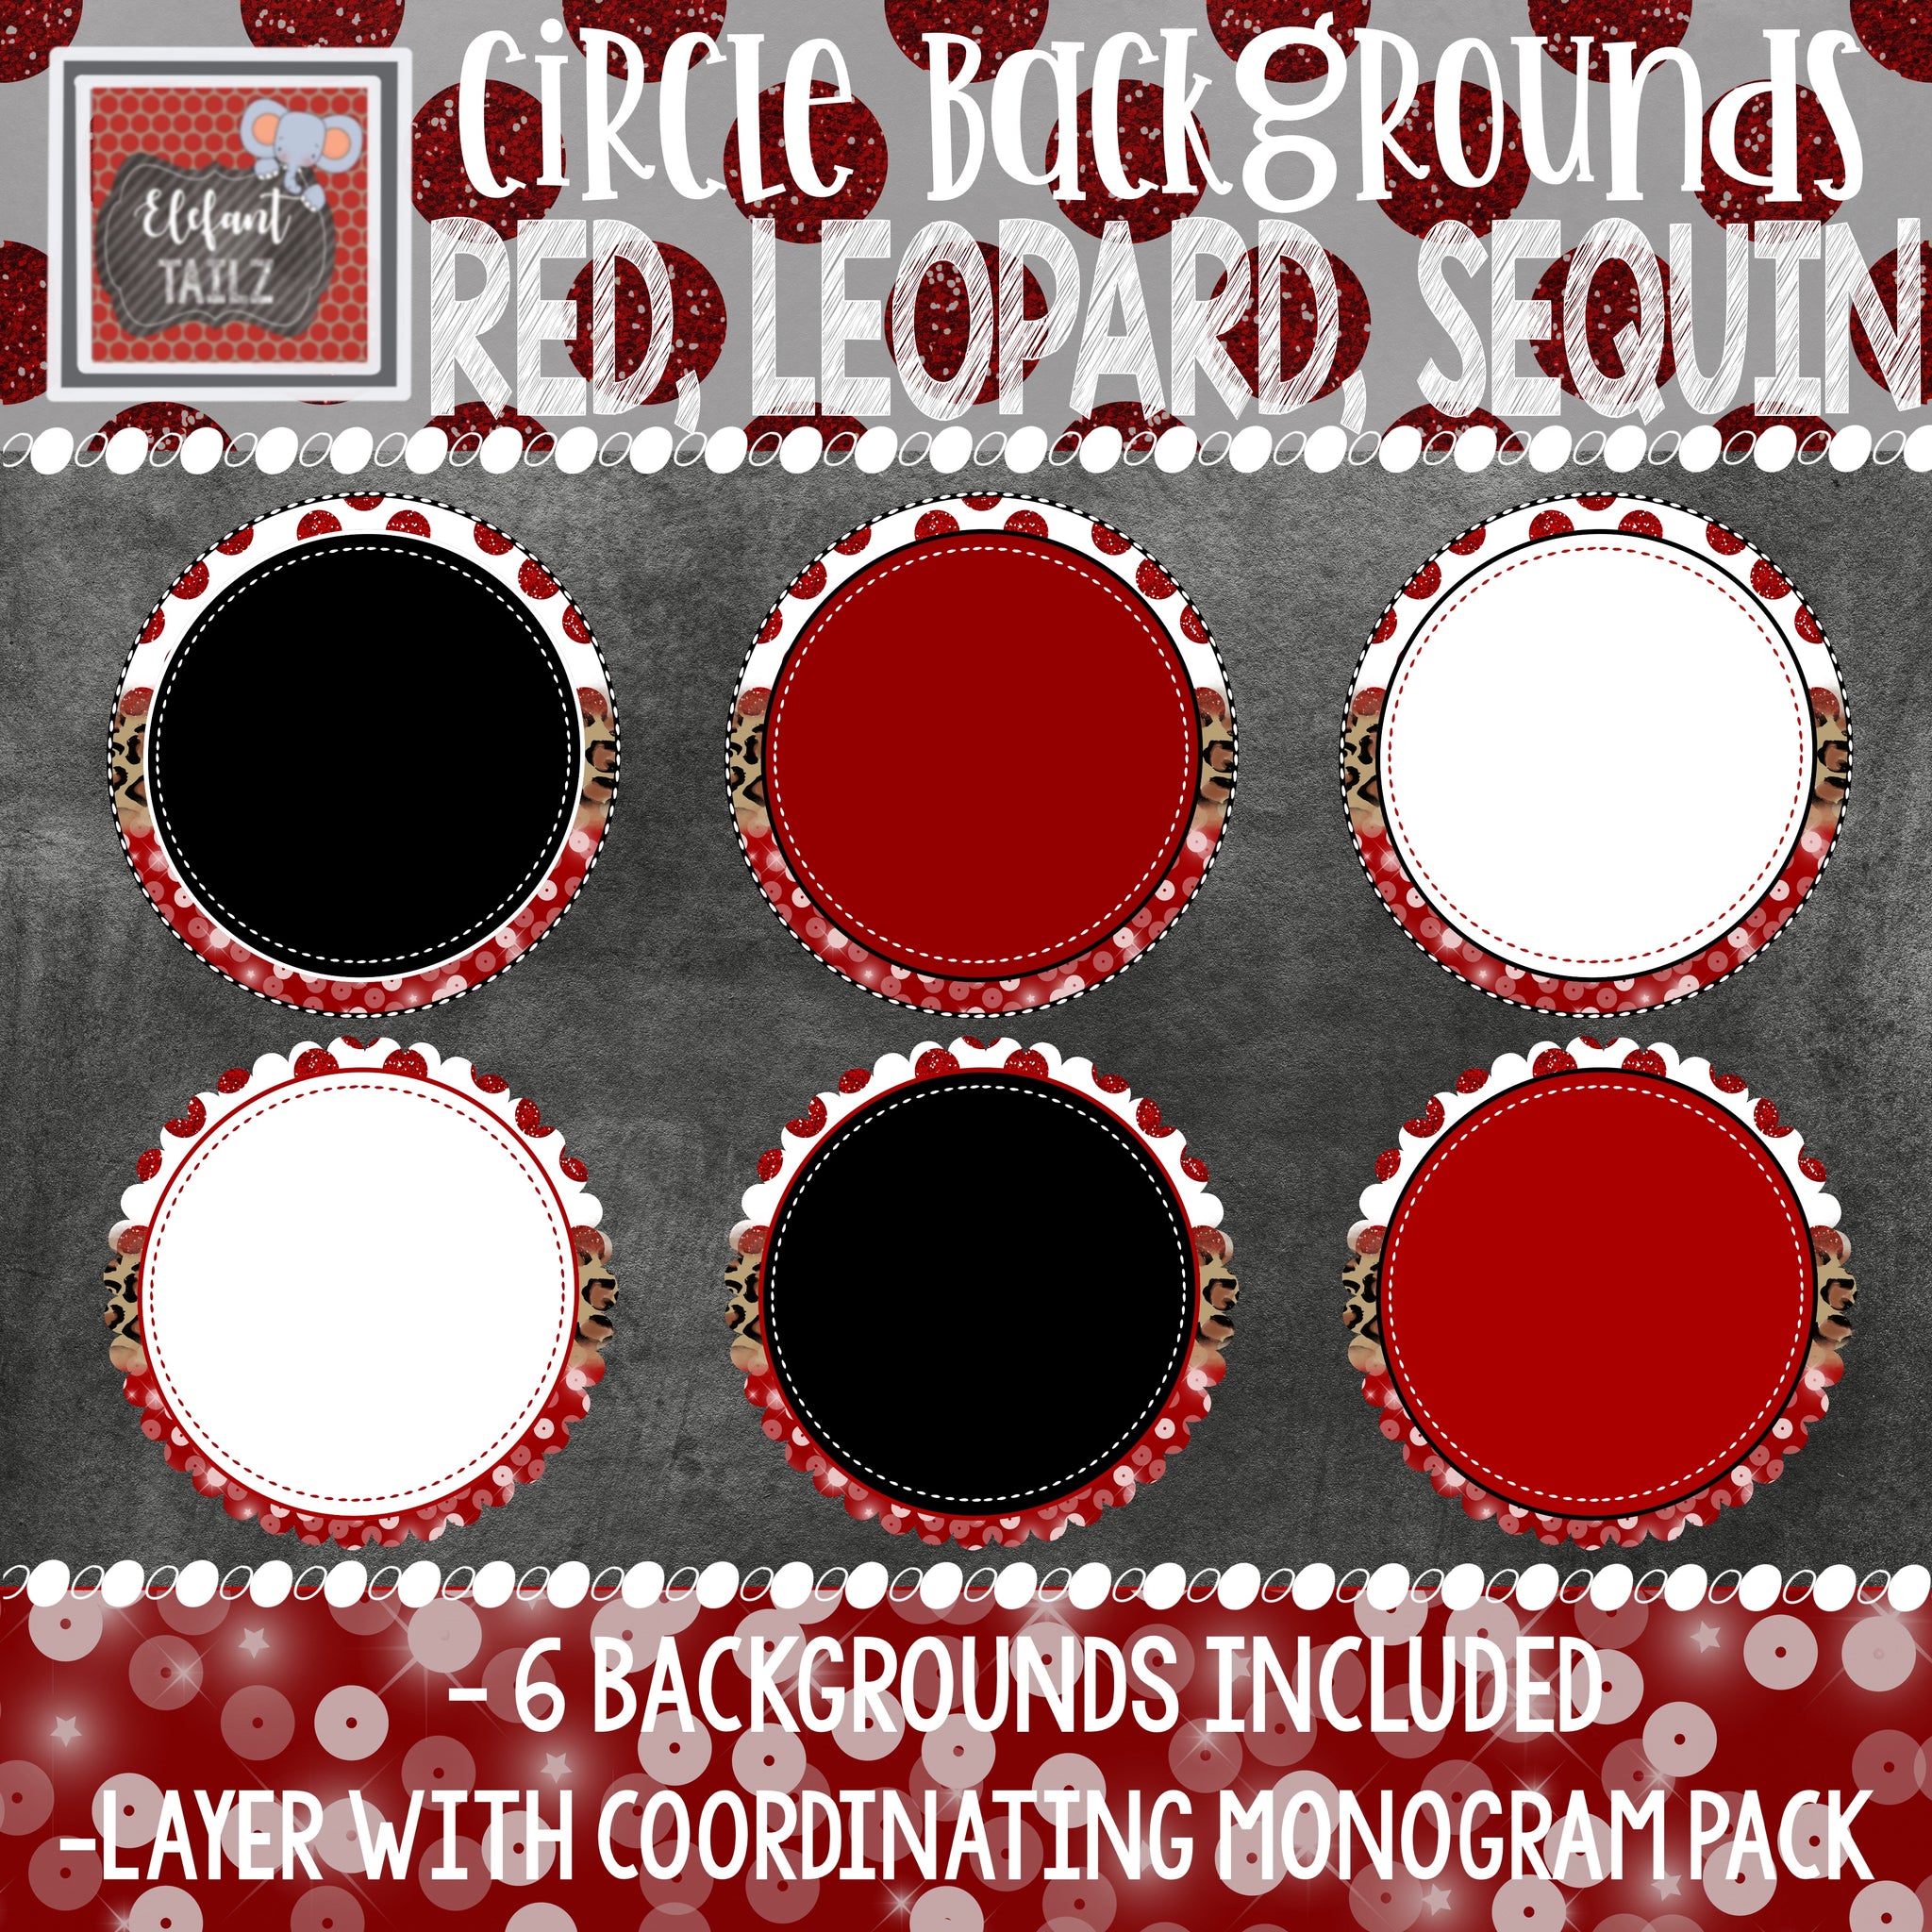 Circle Backgrounds - Red, Leopard, Sequin